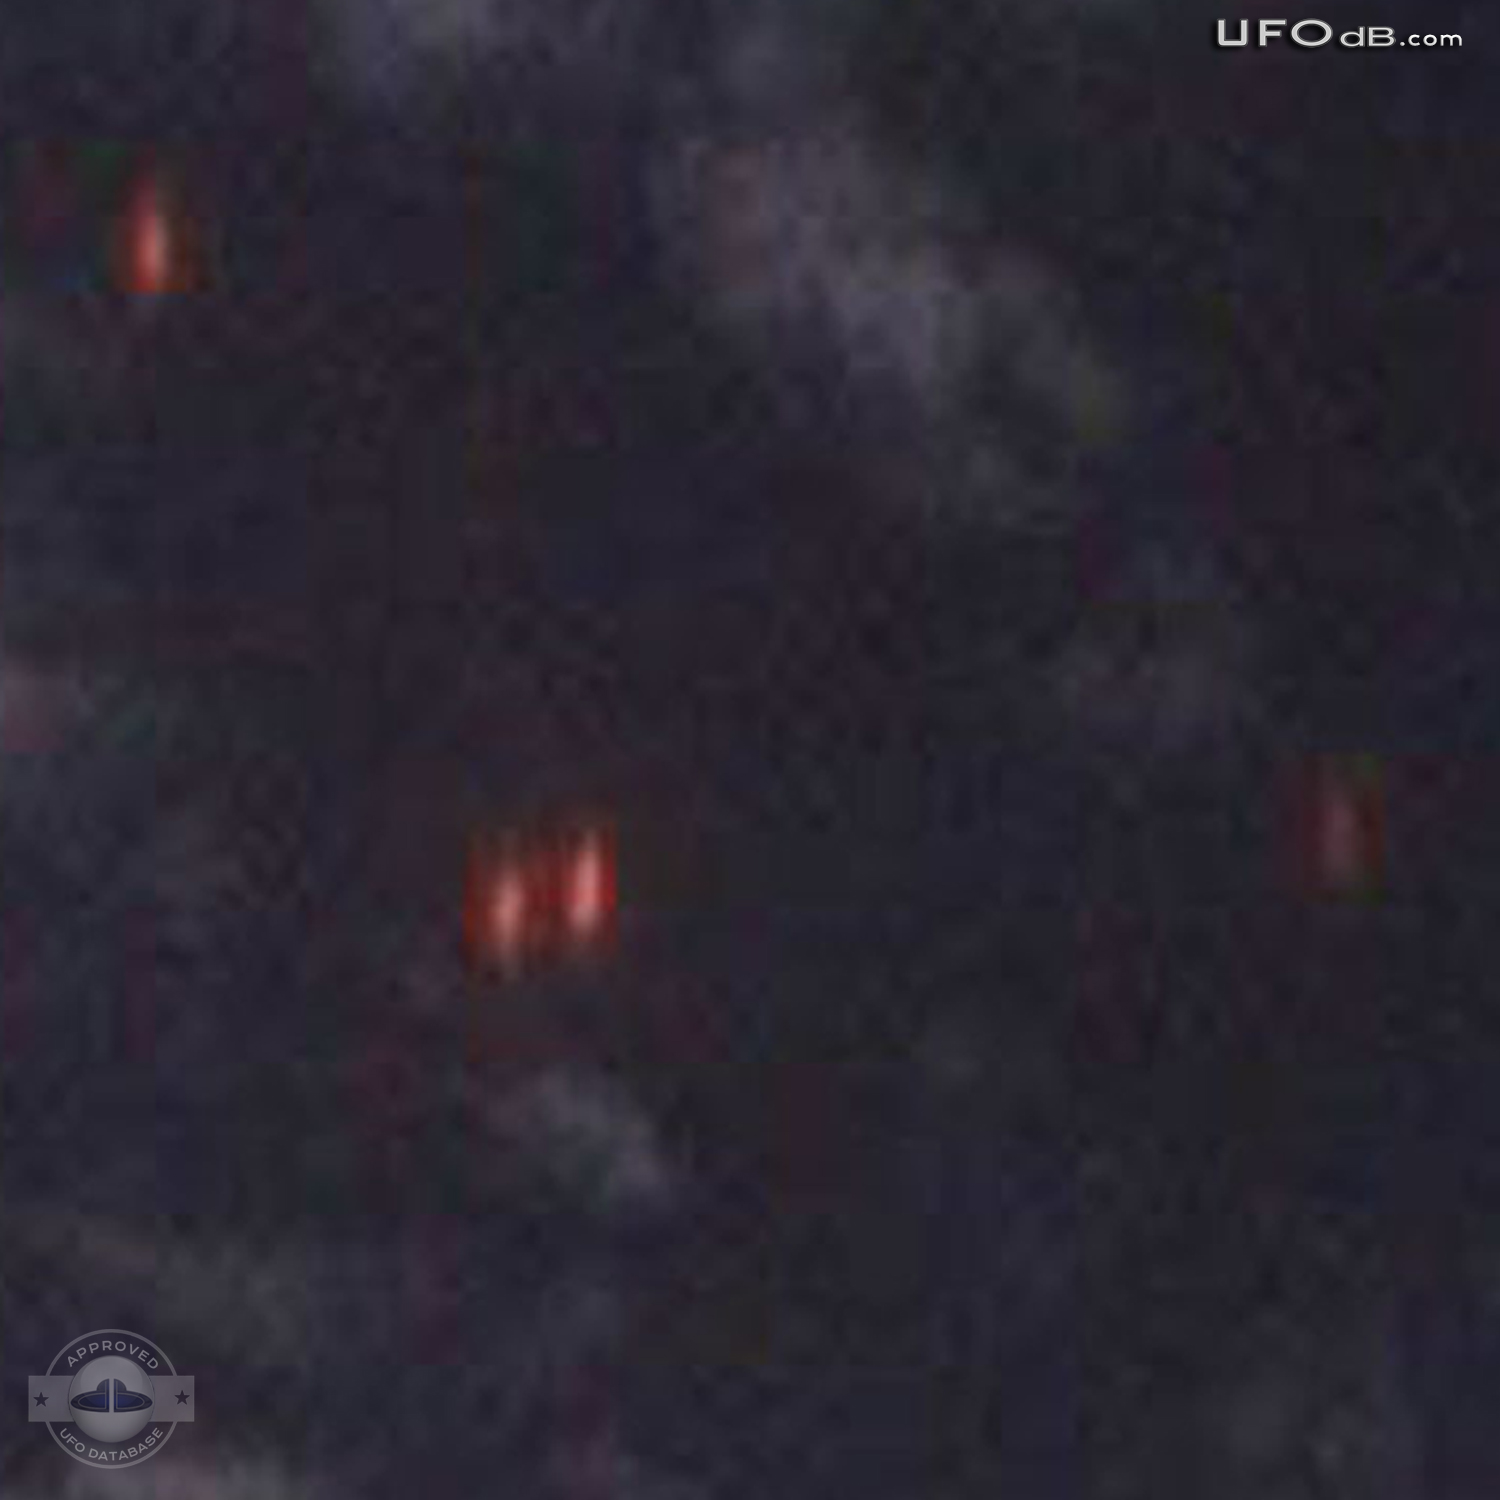 Light Pillars UFOs seen as Heavenly Signs in Bahrain | March 18 2011 UFO Picture #318-4